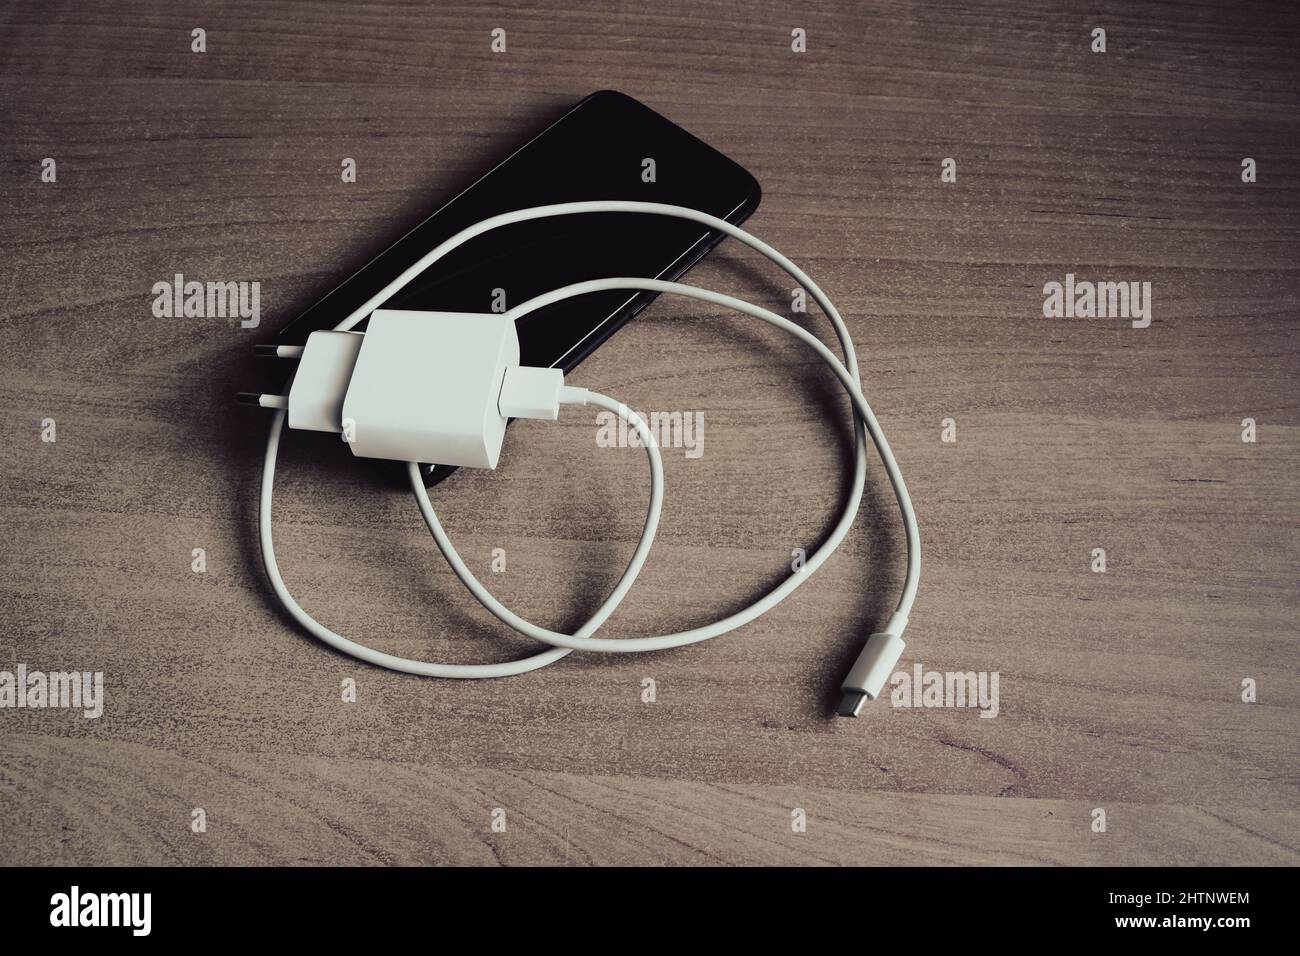 Charger with USB type C cable and smartphone on grunge style wooden table Stock Photo